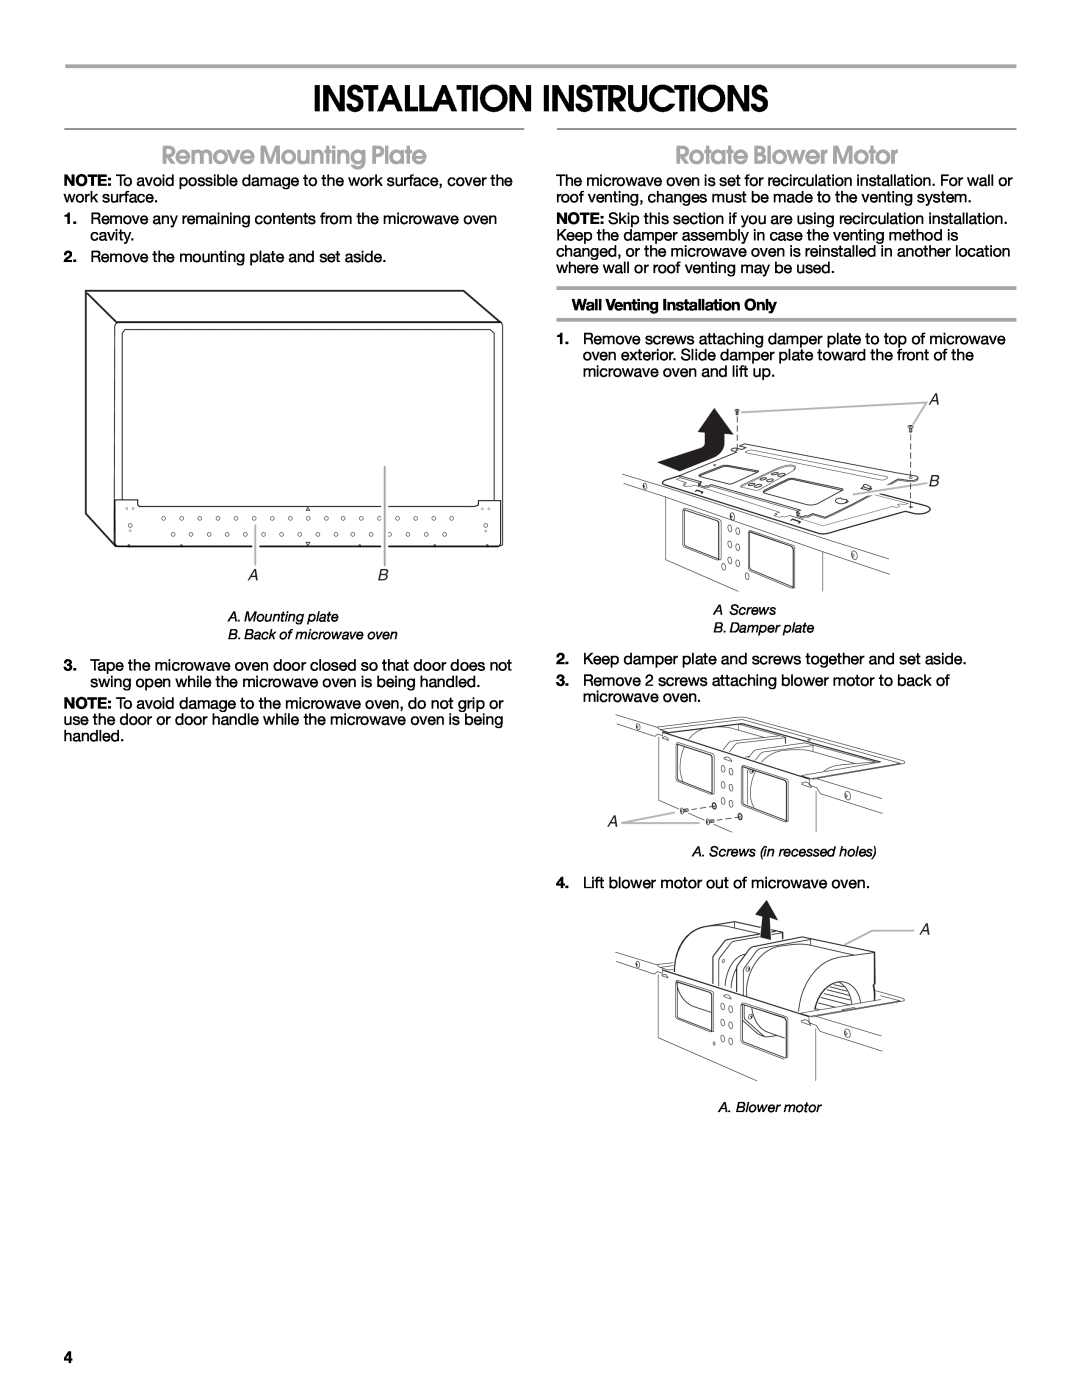 Maytag W10191953A Installation Instructions, Remove Mounting Plate, Rotate Blower Motor, Wall Venting Installation Only 